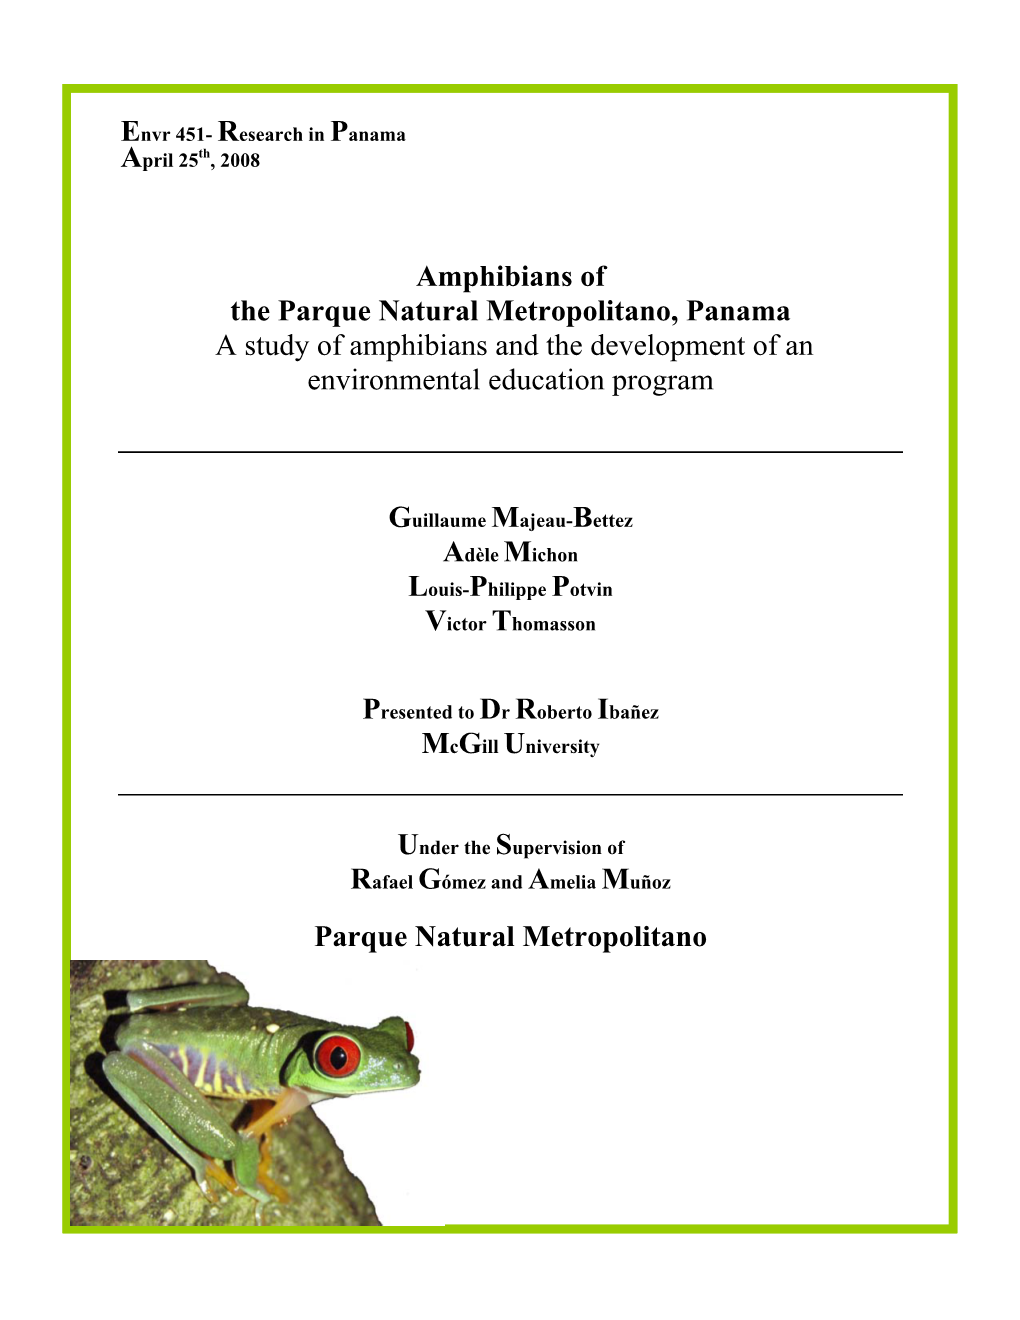 Study of Amphibians of the Parque Natural